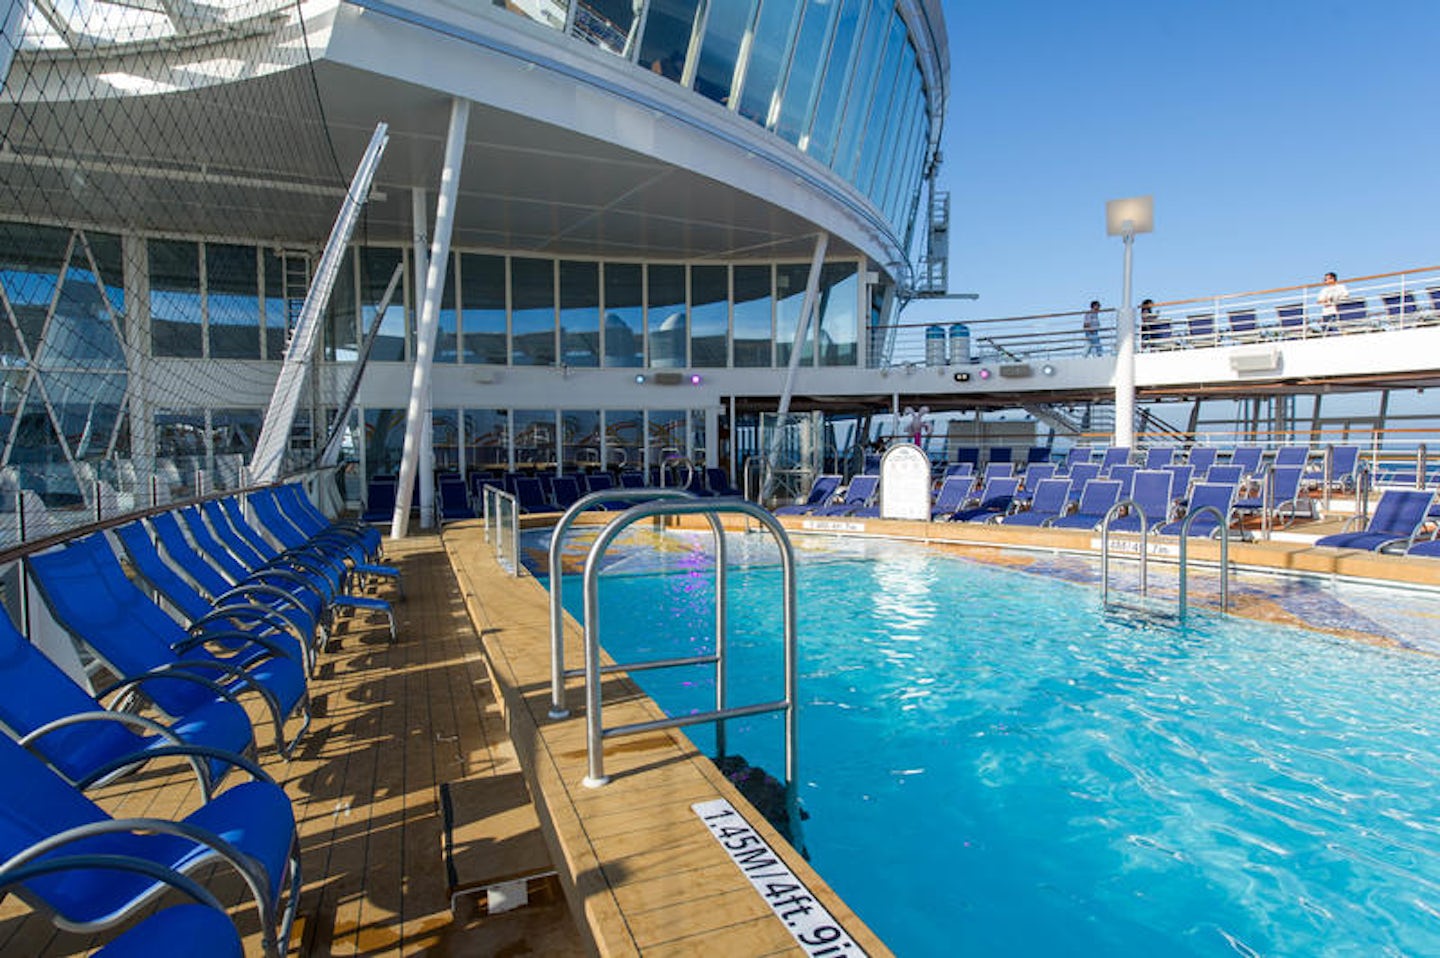 The Sports Pool on Harmony of the Seas